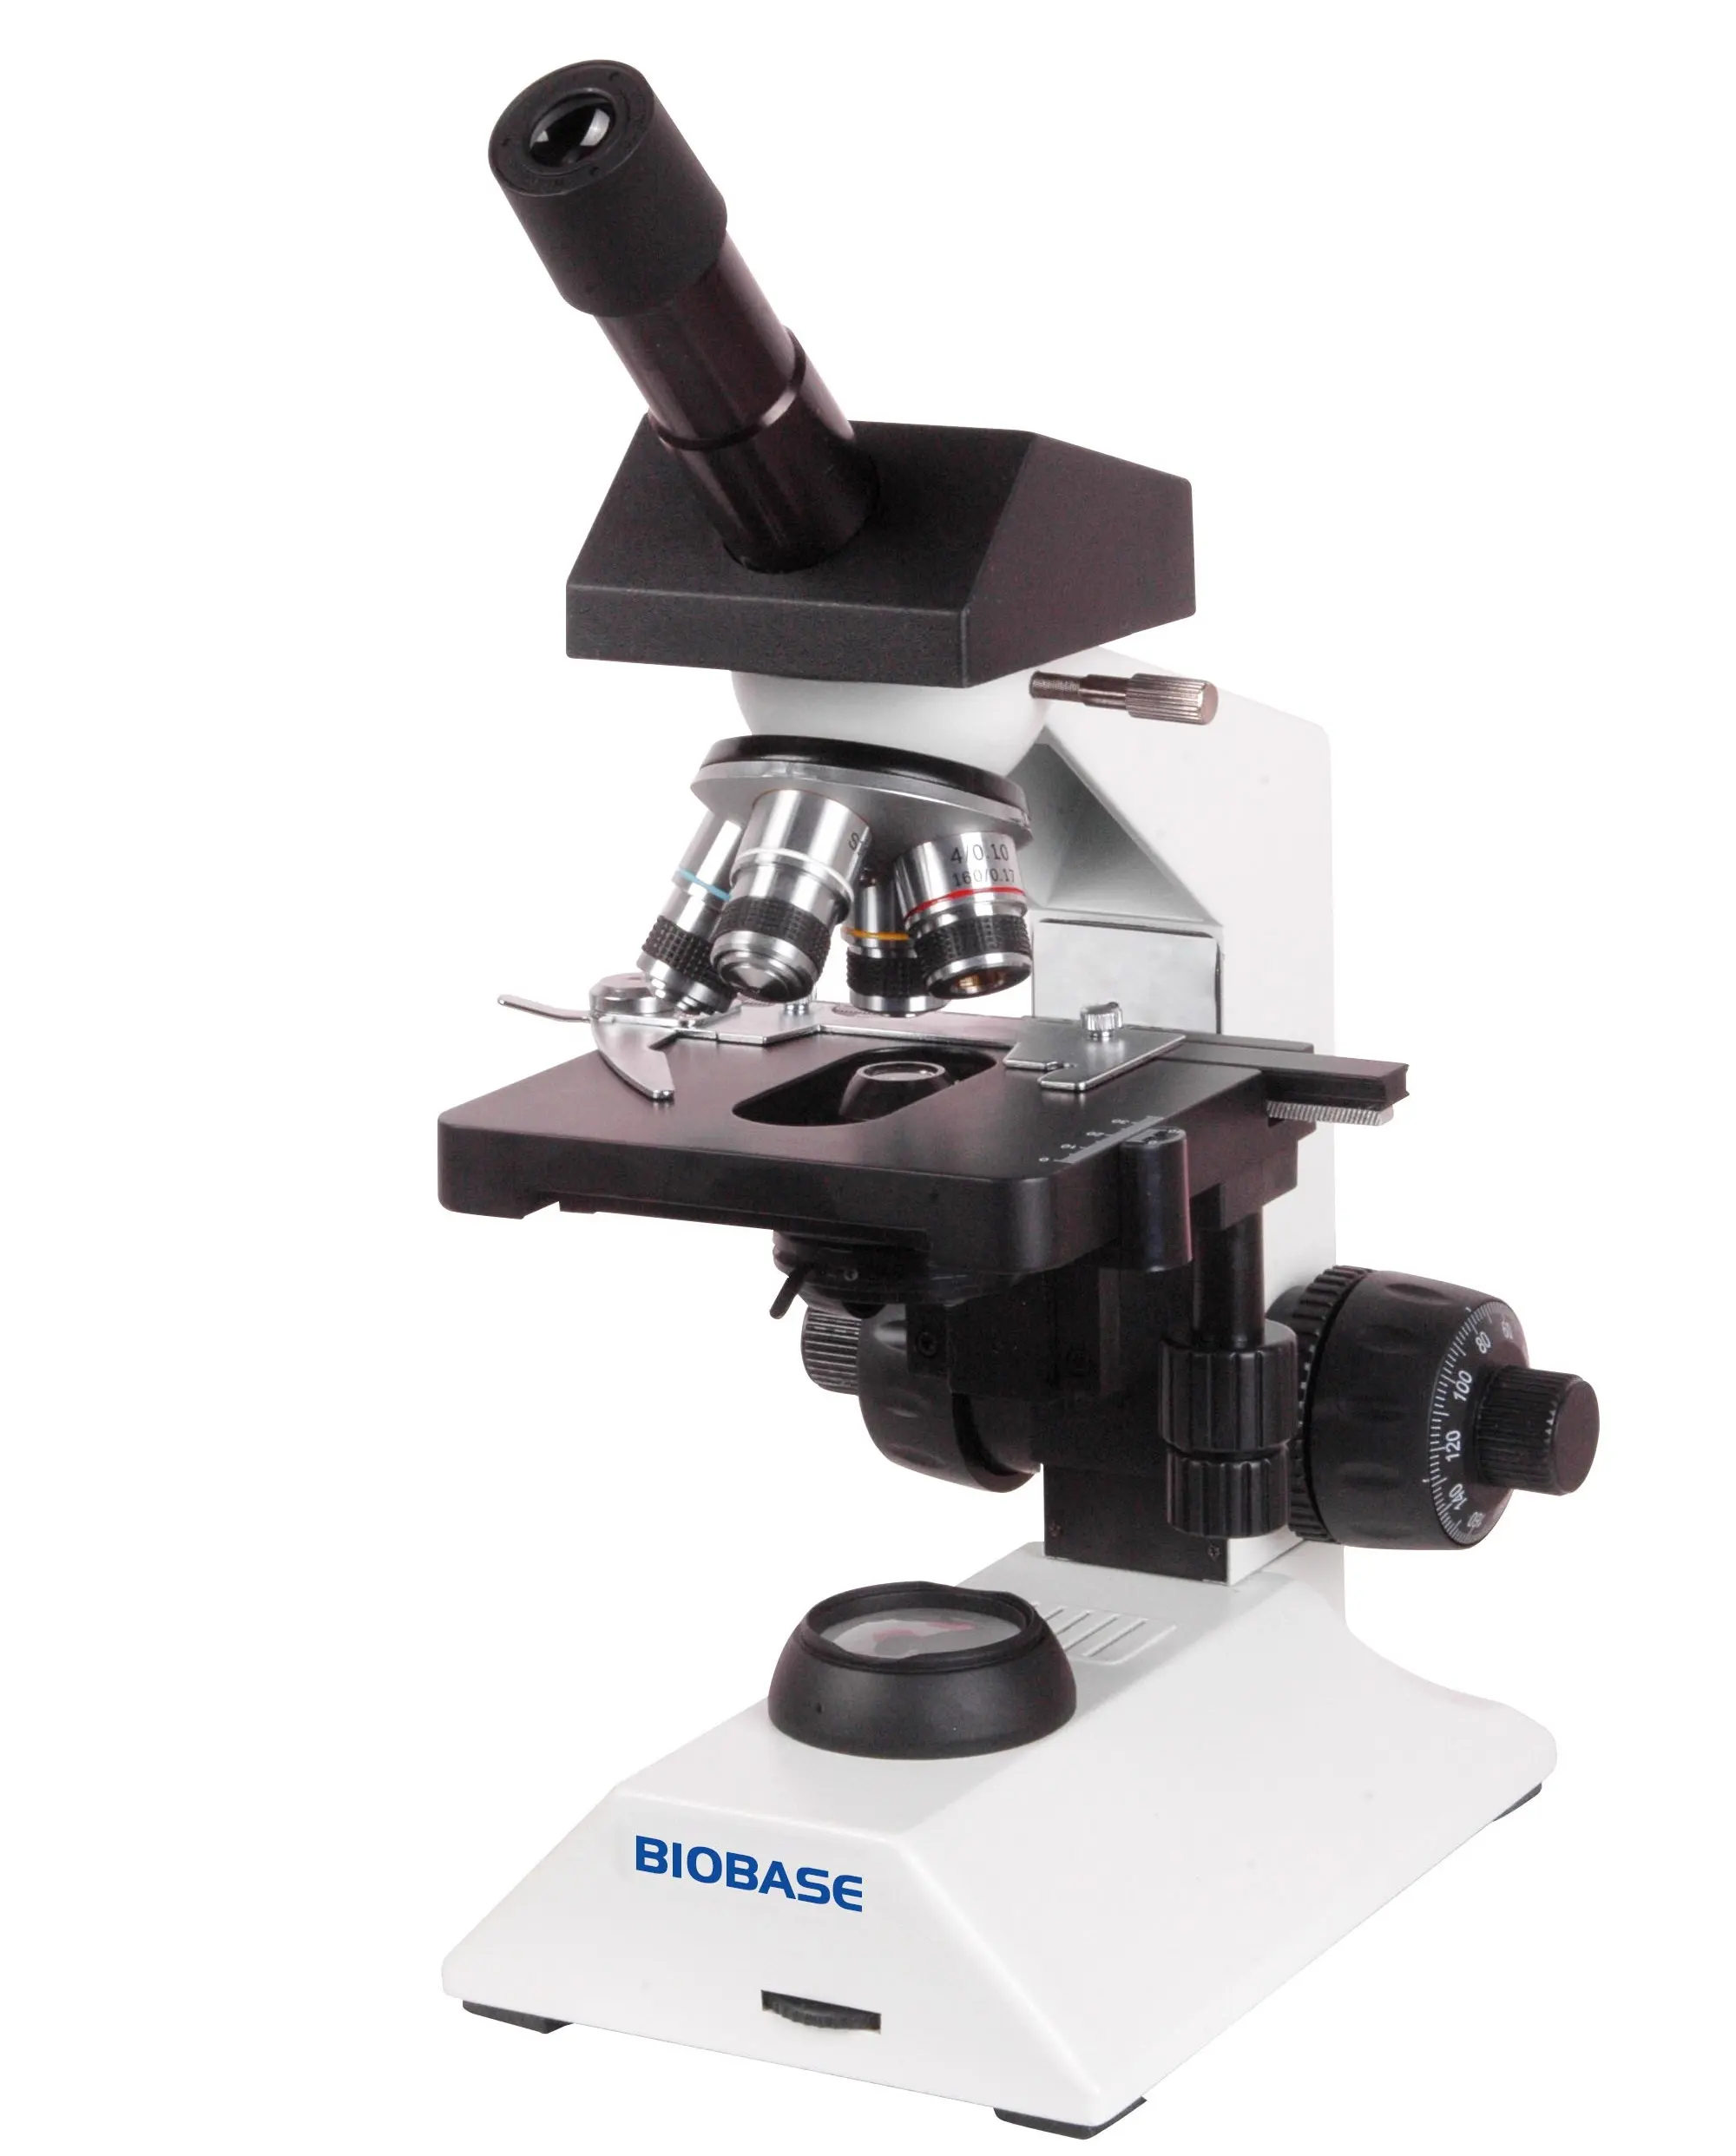 BIOBASE China BX-Series Laboratory Biological Microscope BX-101A with Monocular Head for Lab Biological Microscope